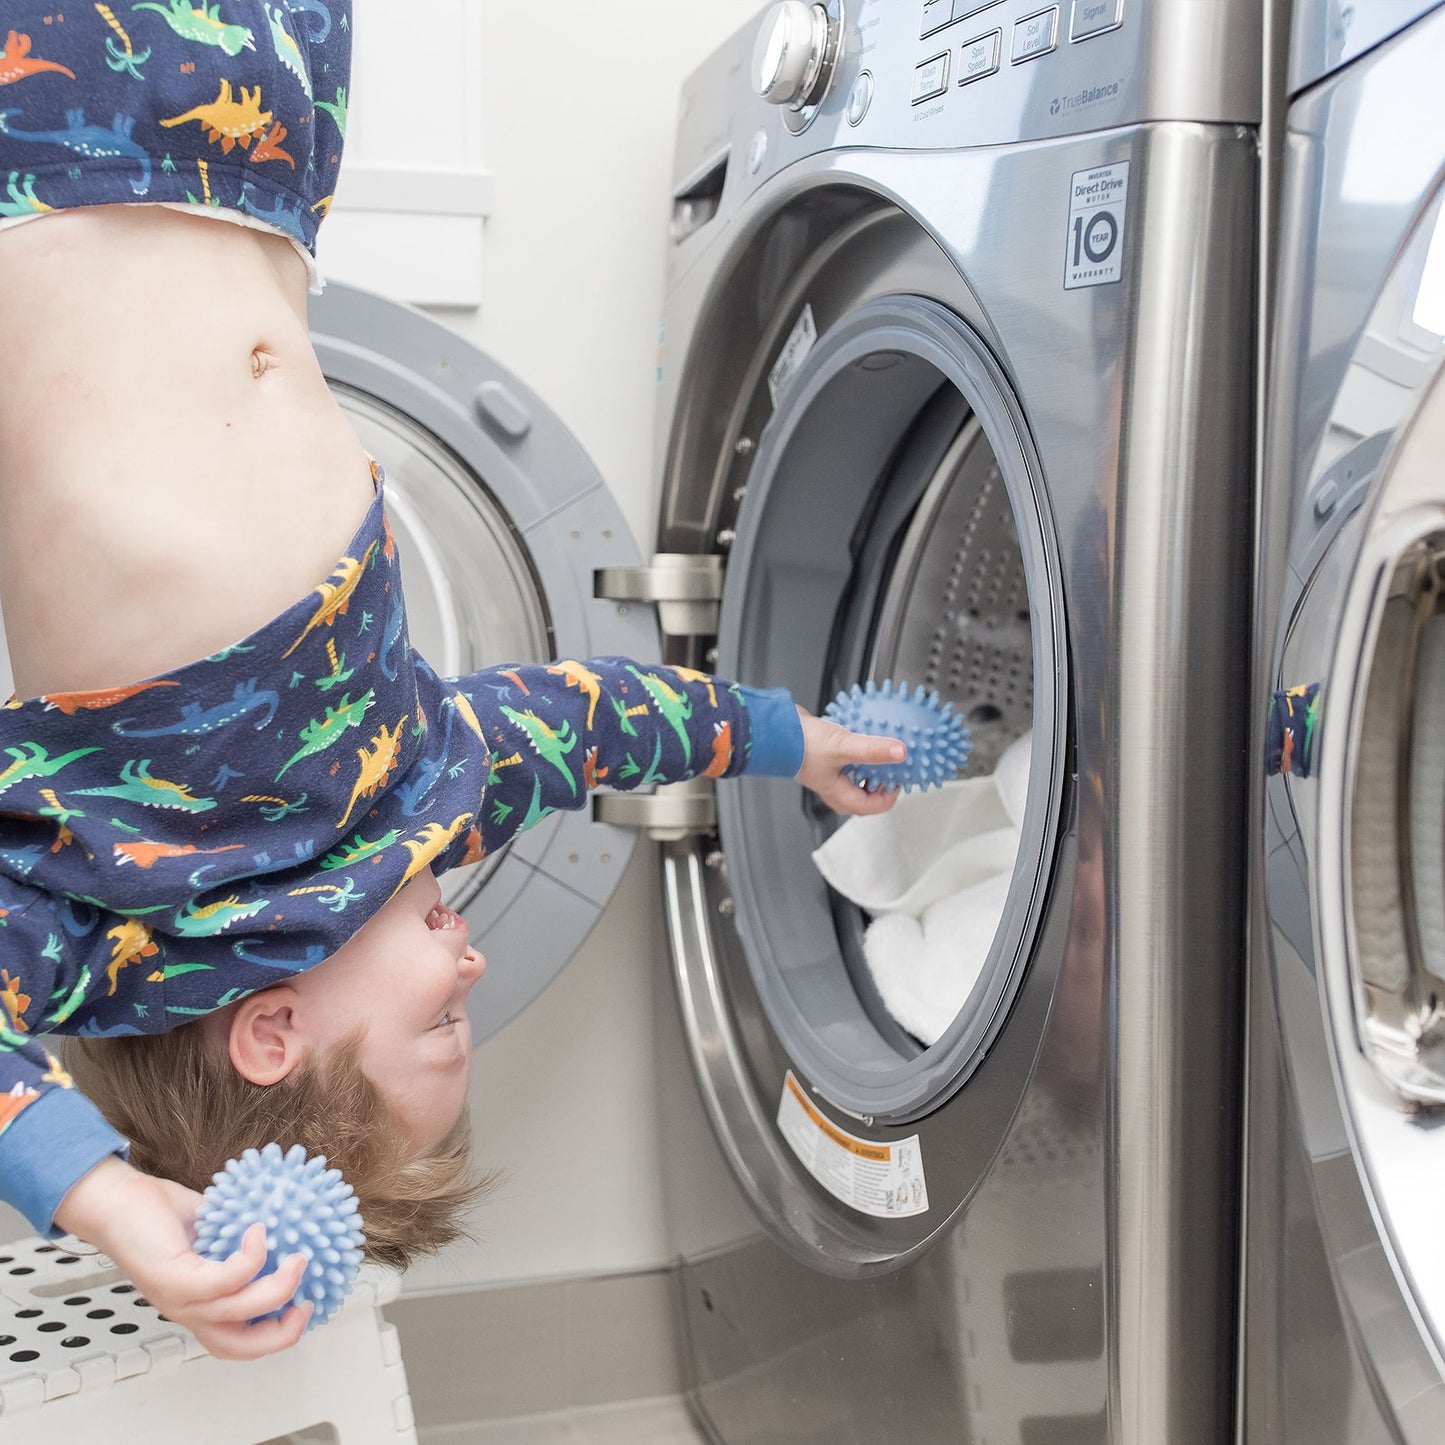 A upside down kid holding a dryerball in a hand and putting another dryer ball into the front load washing machine